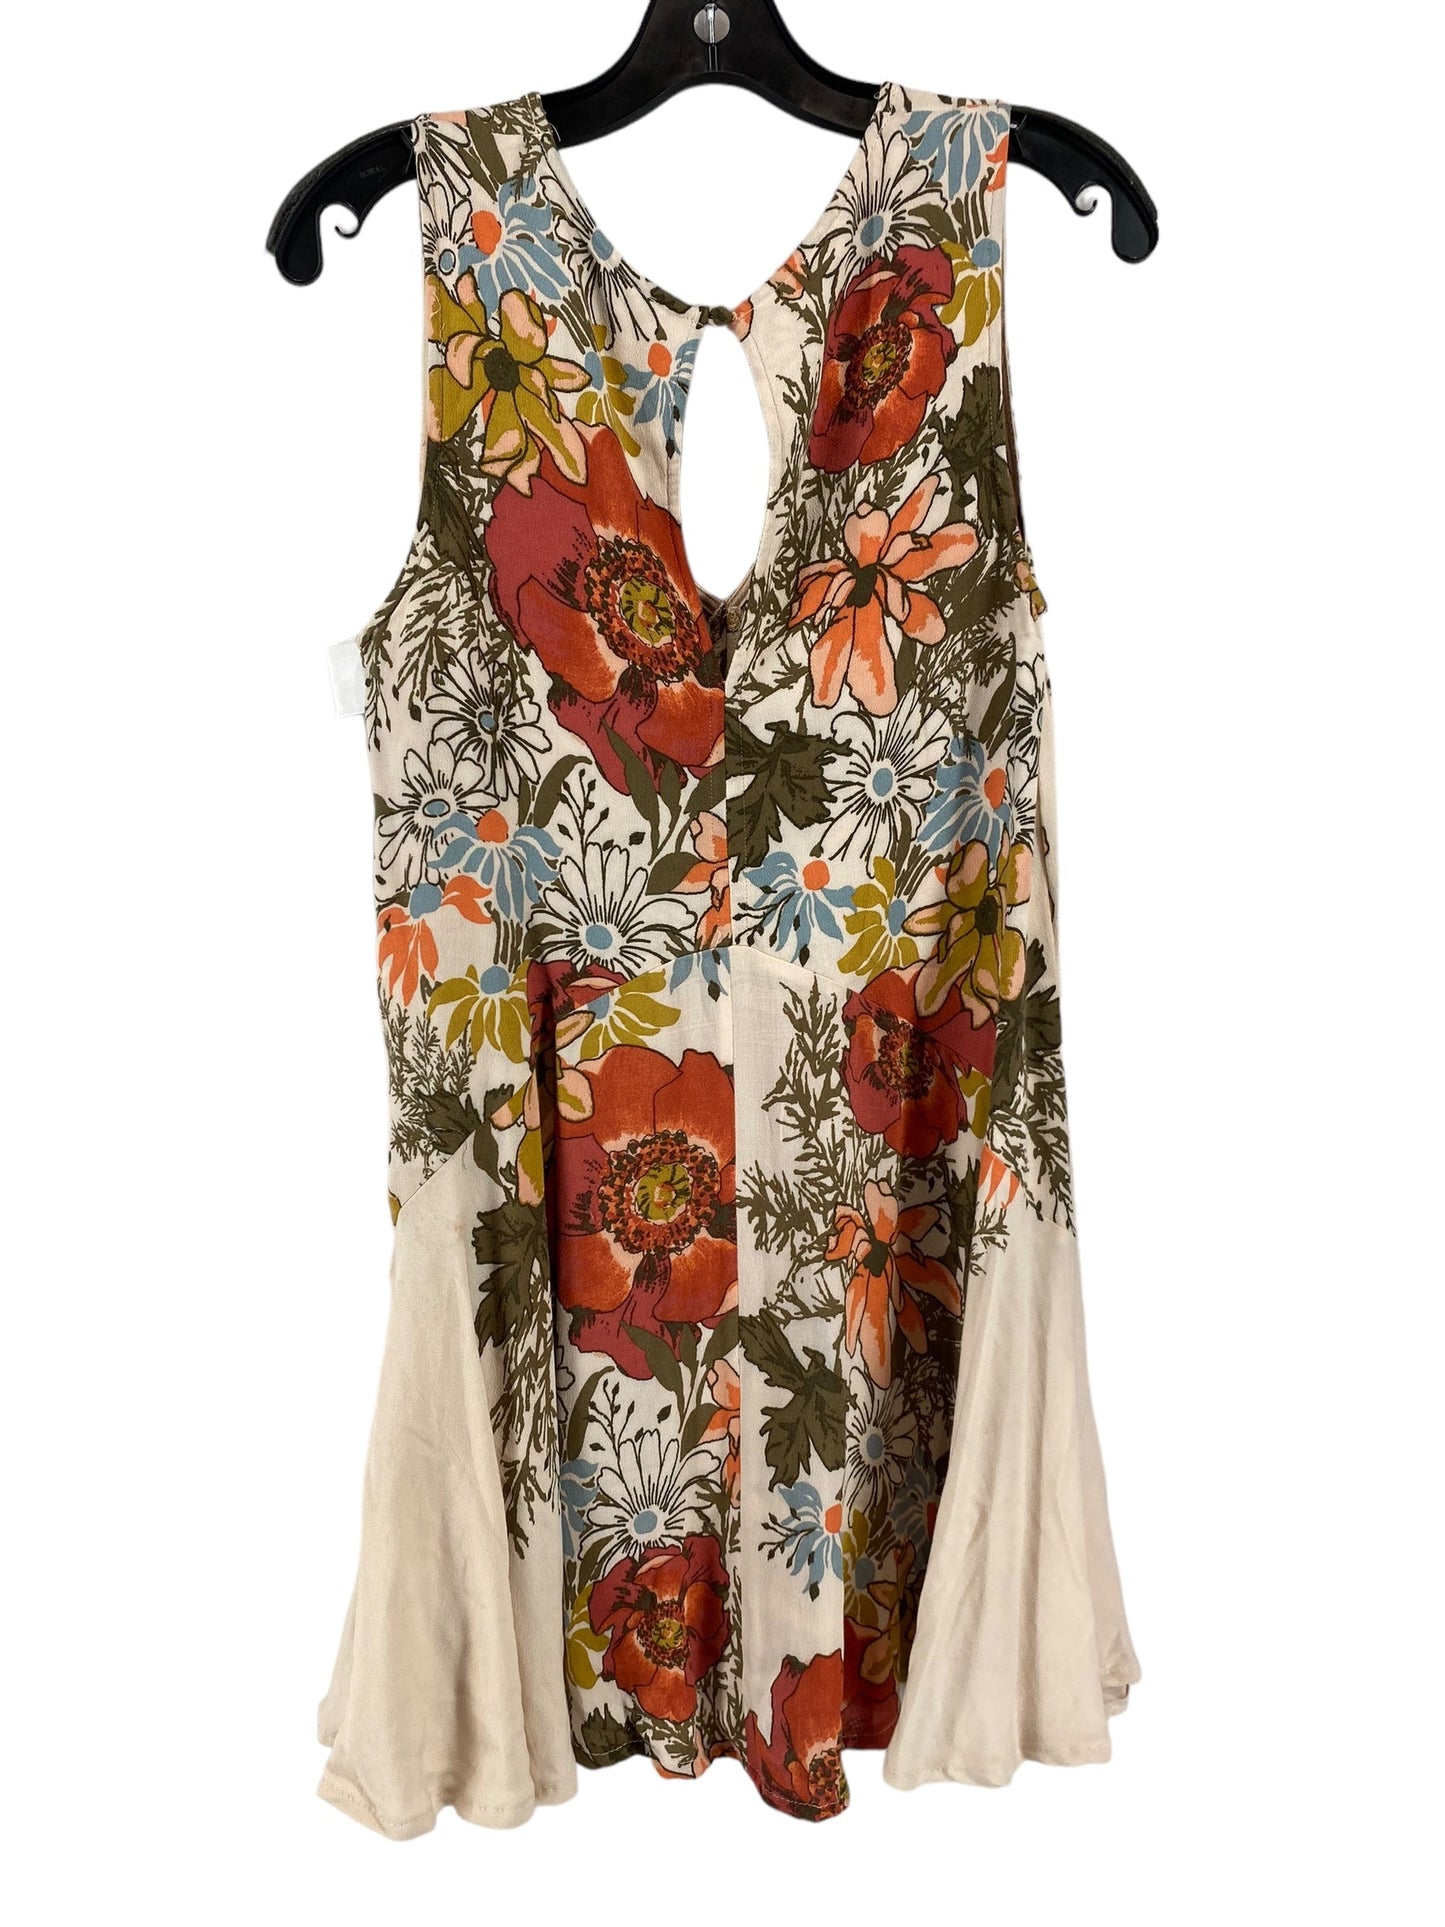 Floral Print Dress Casual Short Free People, Size M